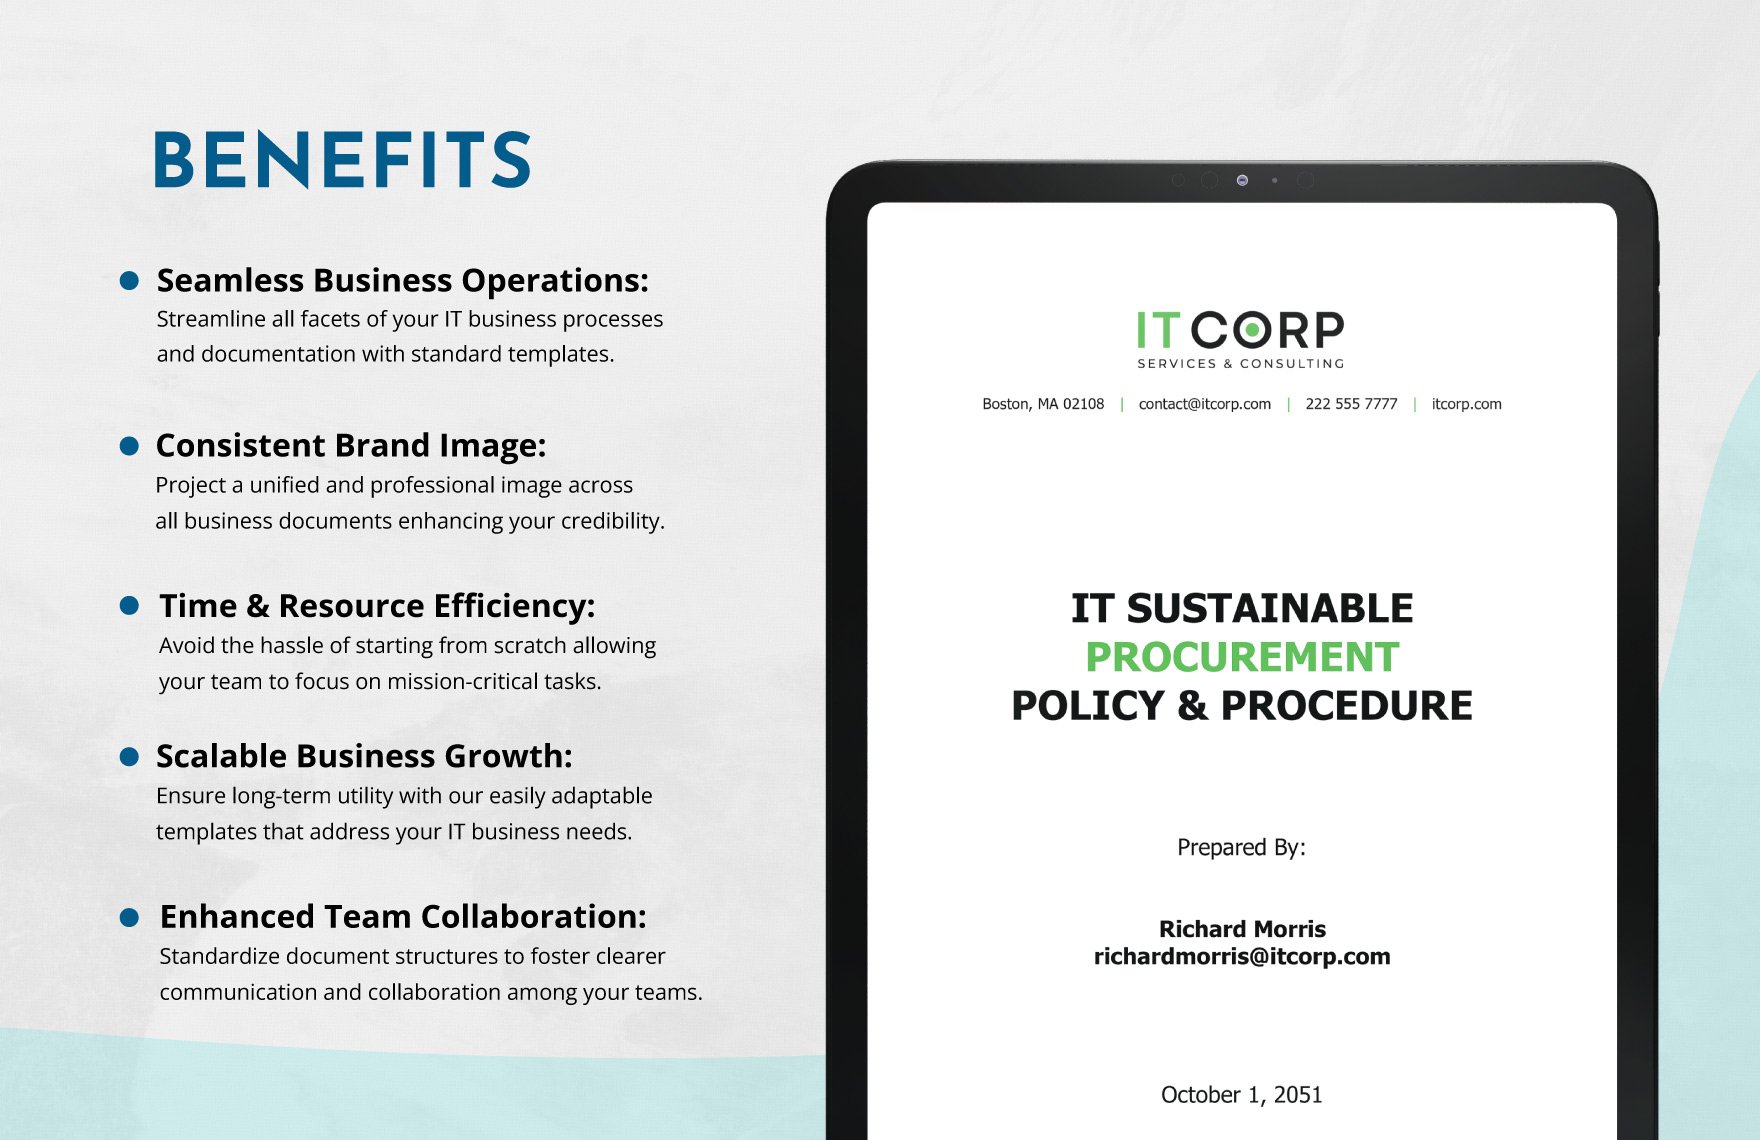 IT Sustainable Procurement Policy & Procedure Template